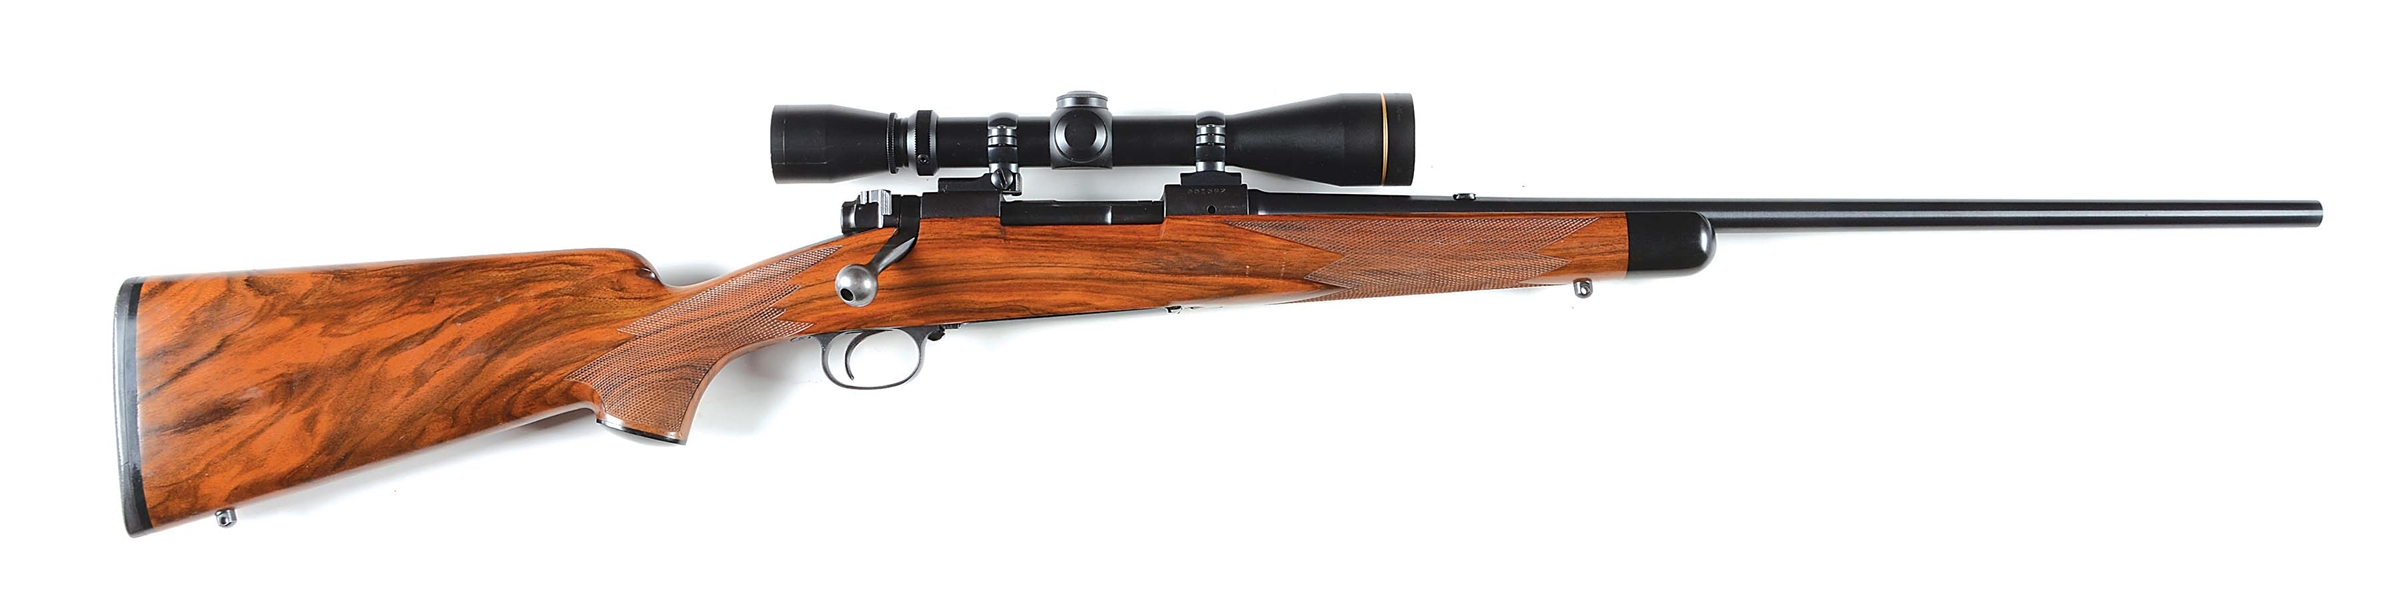 (C) CUSTOM PRE-64 WINCHESTER MODEL 70 FEATHERWEIGHT BOLT ACTION SPORTING RIFLE (1955).